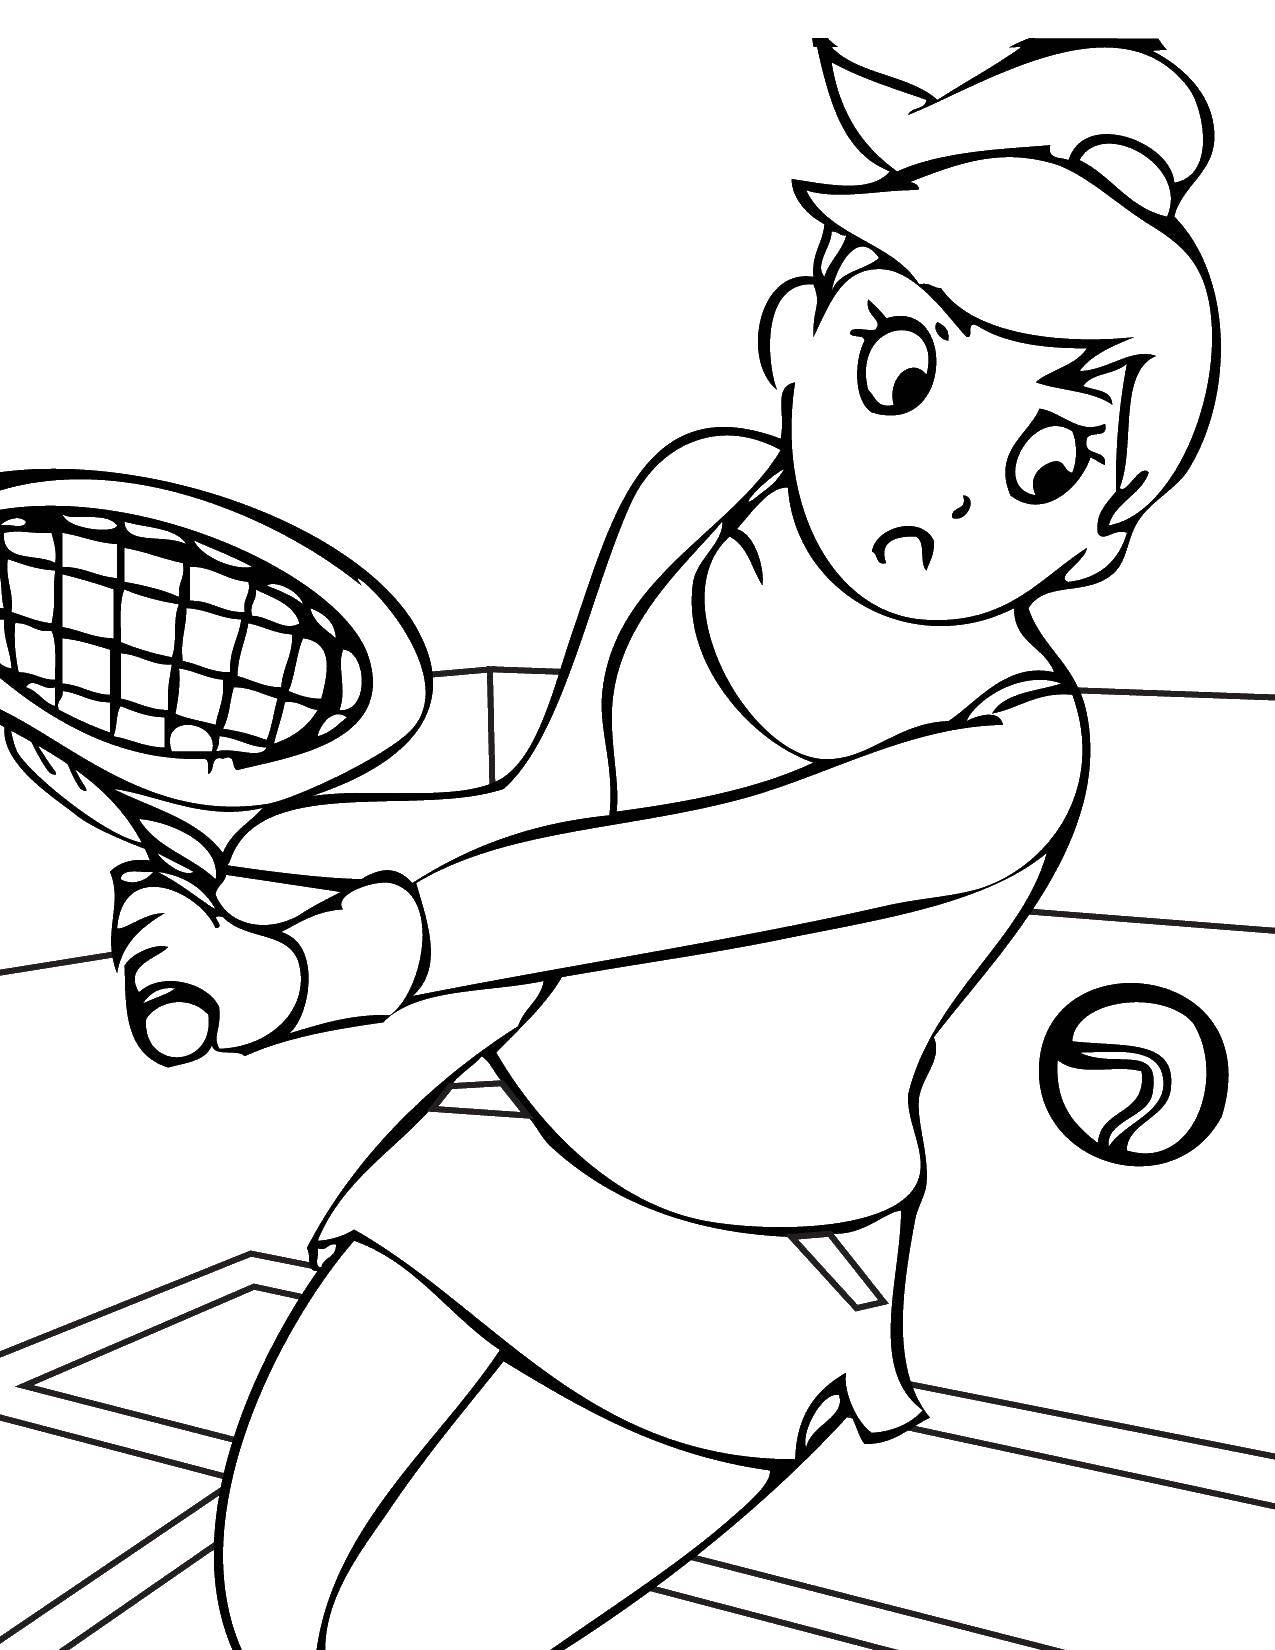 Coloring Focused tennis player. Category Sports. Tags:  Sports, tennis, racquet.